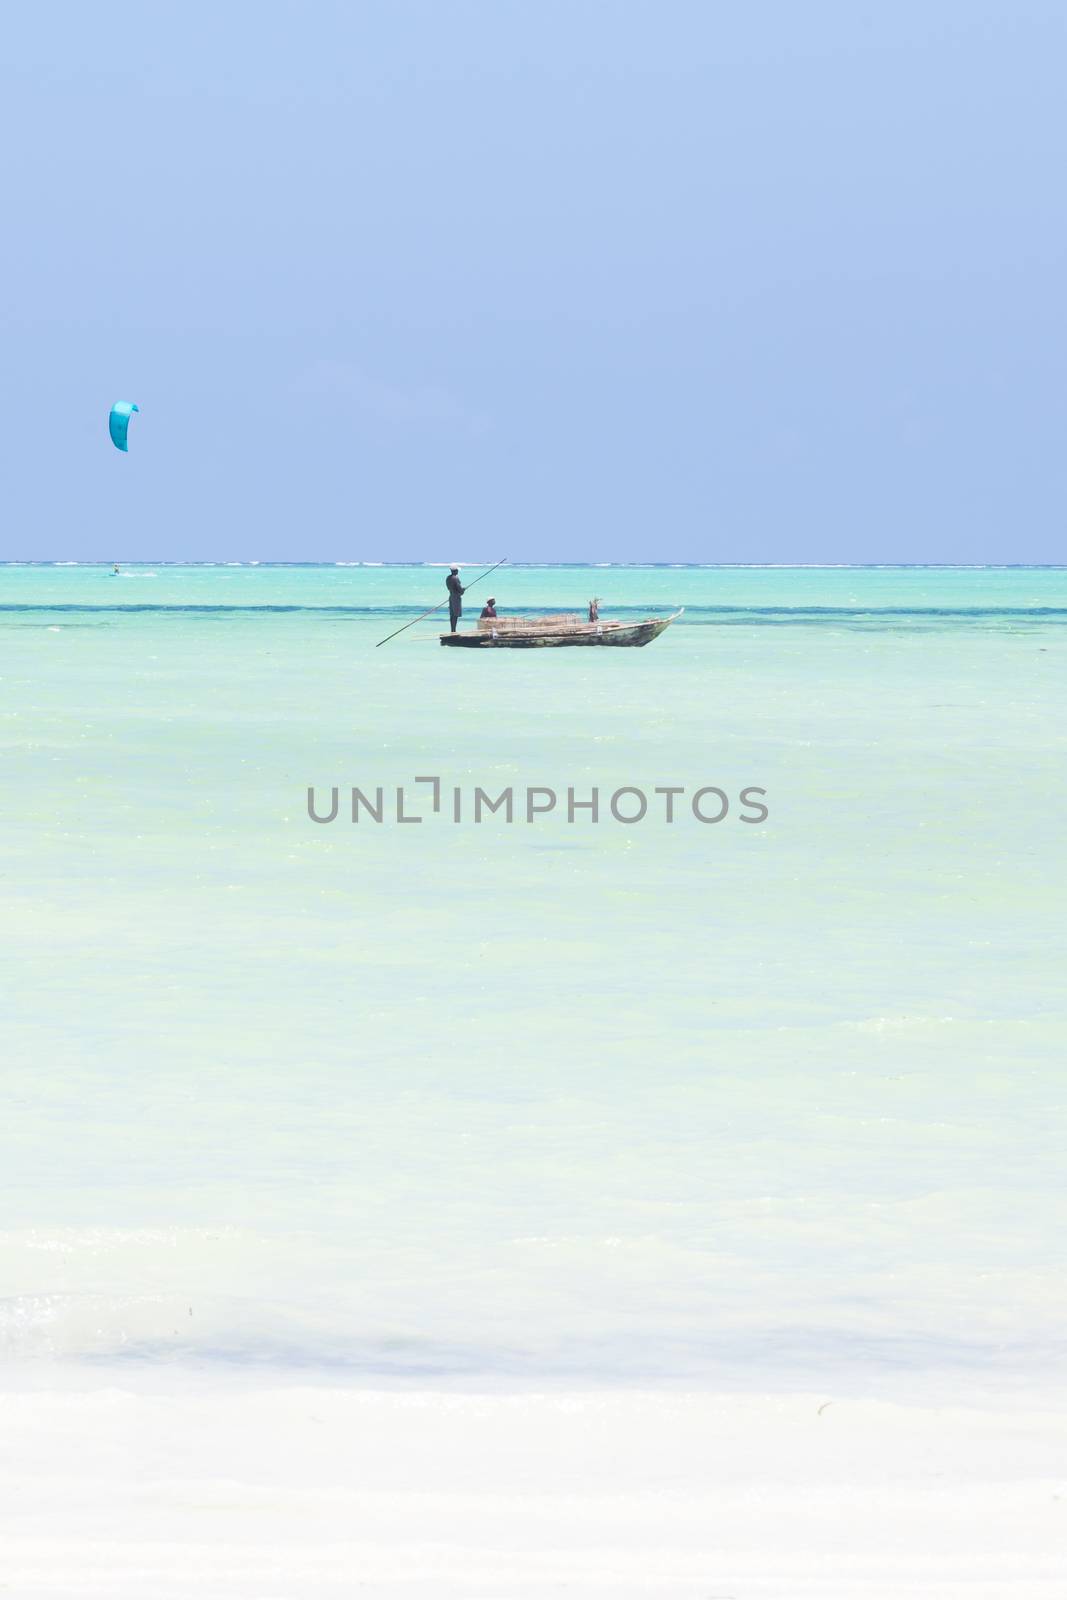 fishing boat and a kite surfer on picture perfect white sandy beach with turquoise blue sea, Paje, Zanzibar, Tanzania. by kasto